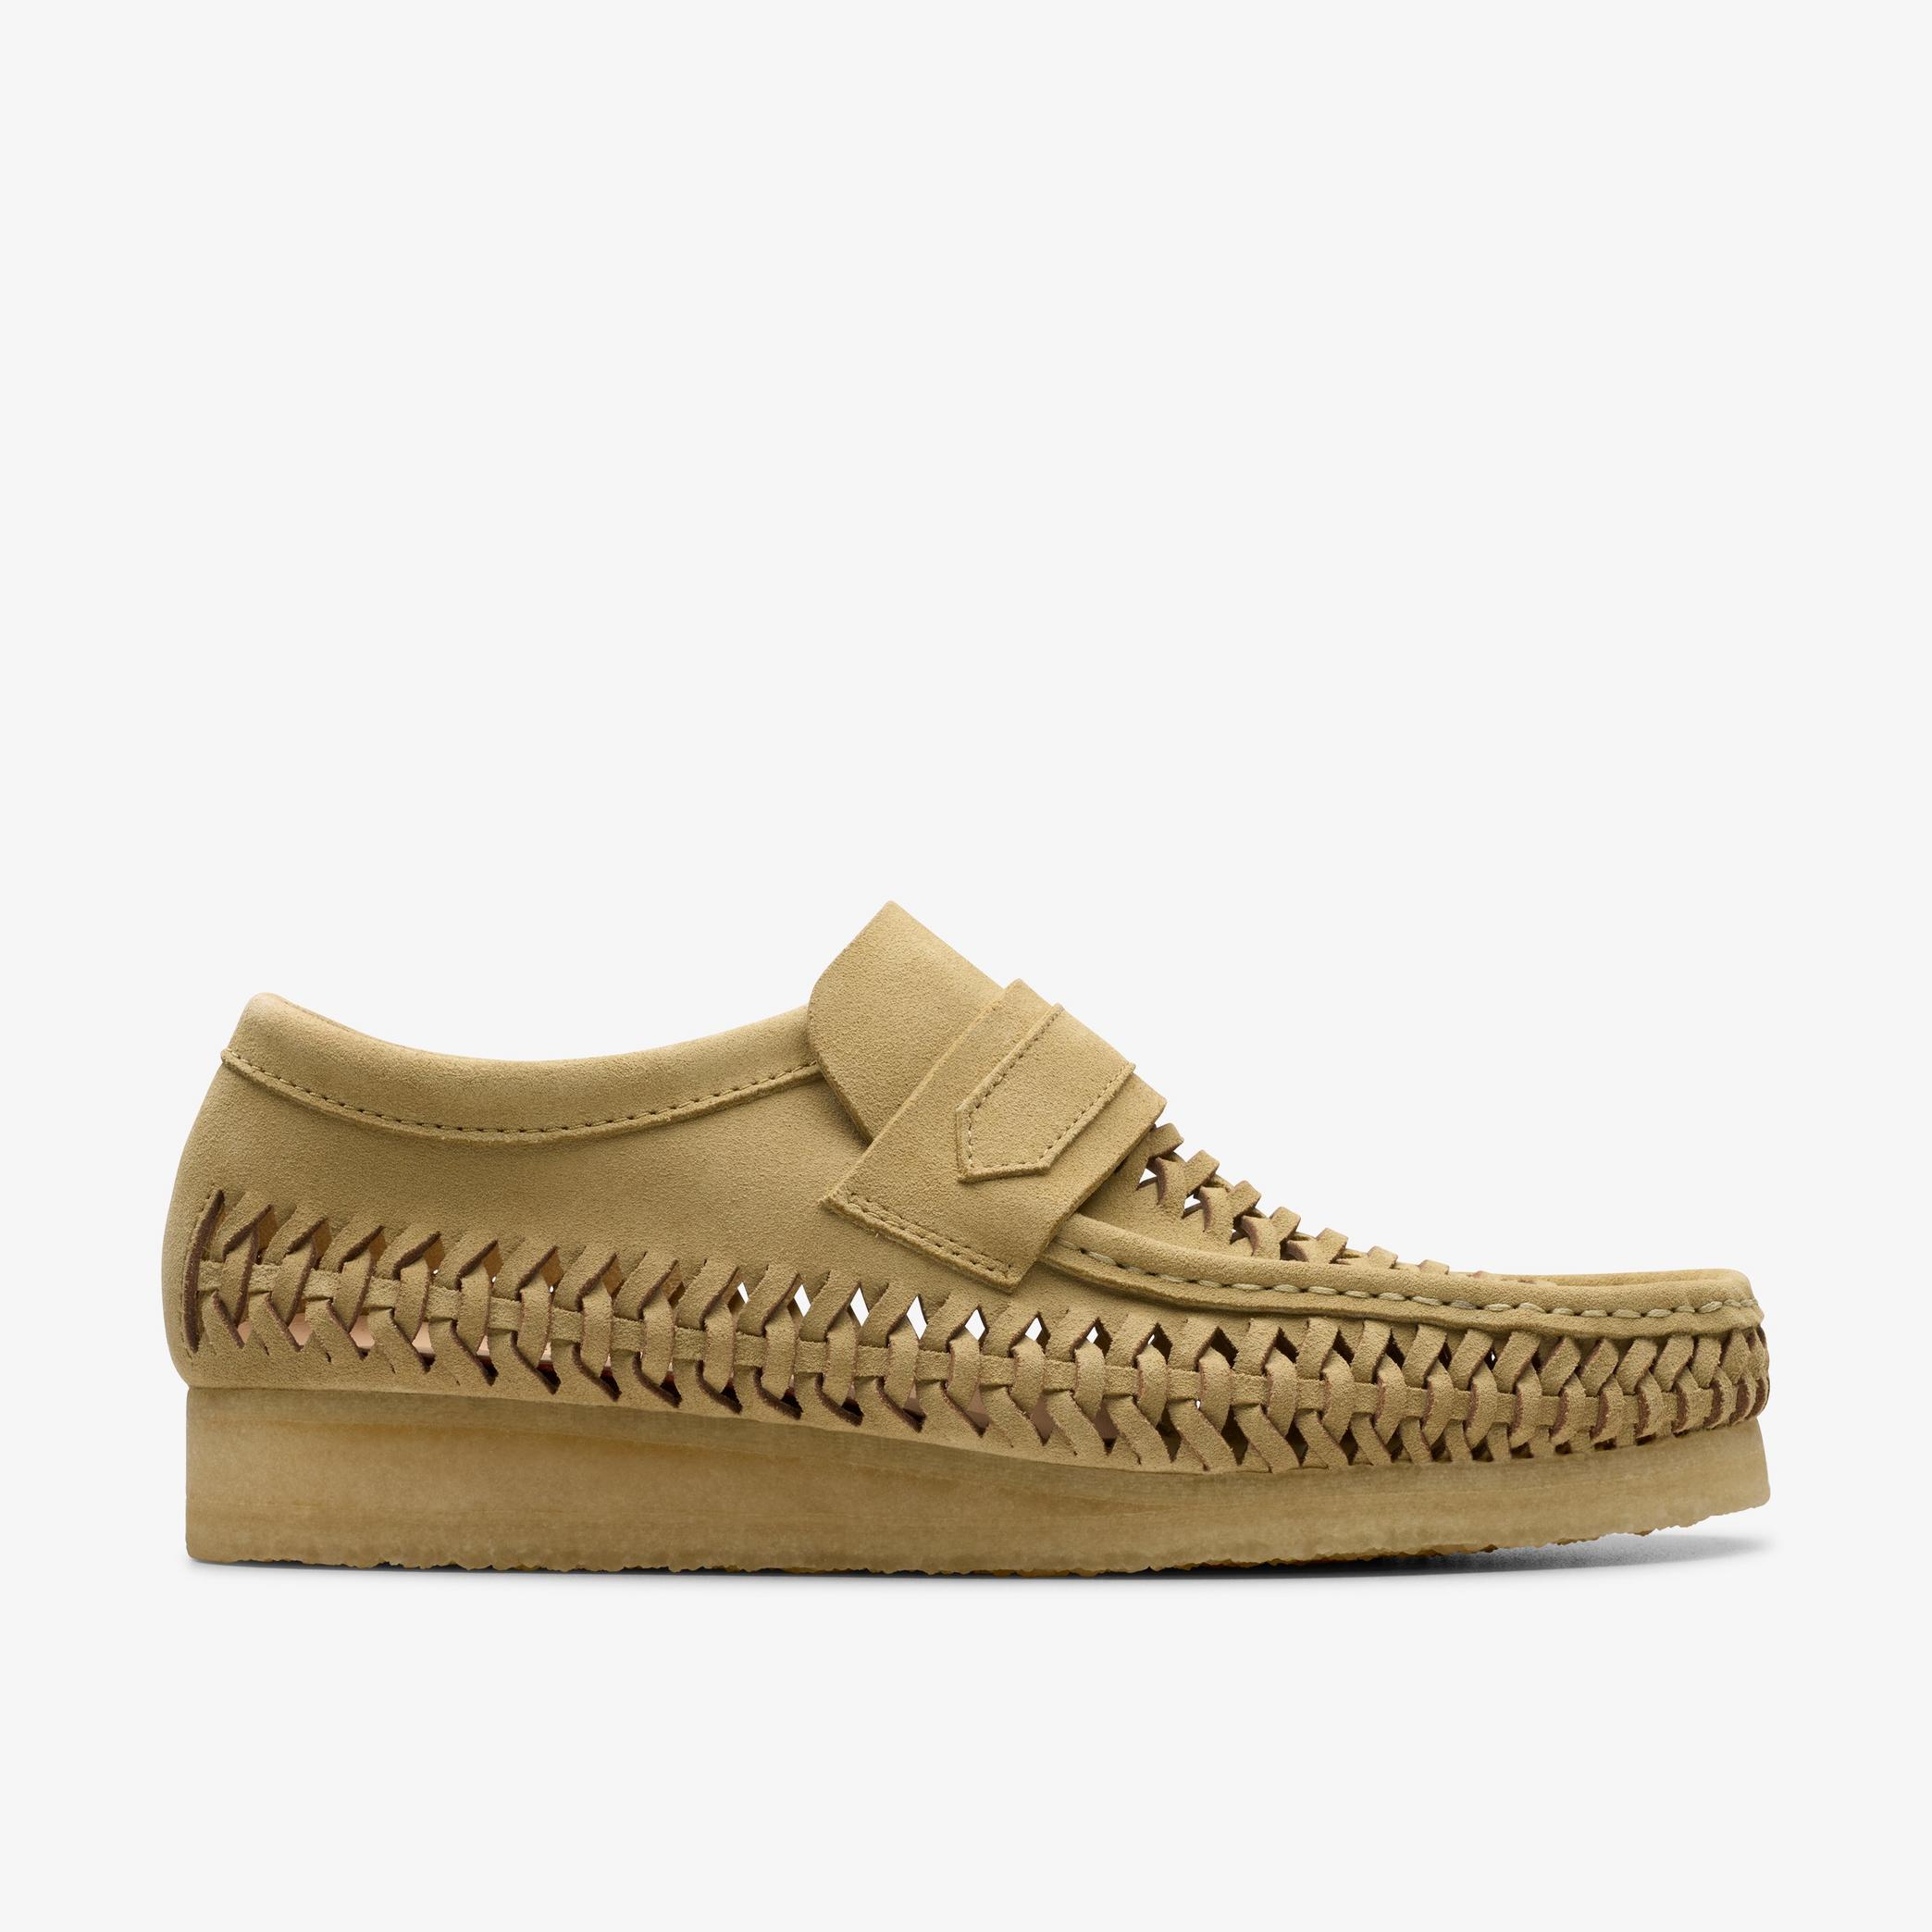 Mens Wallabee Loafer Weave Maple Suede Moccasins | Clarks US